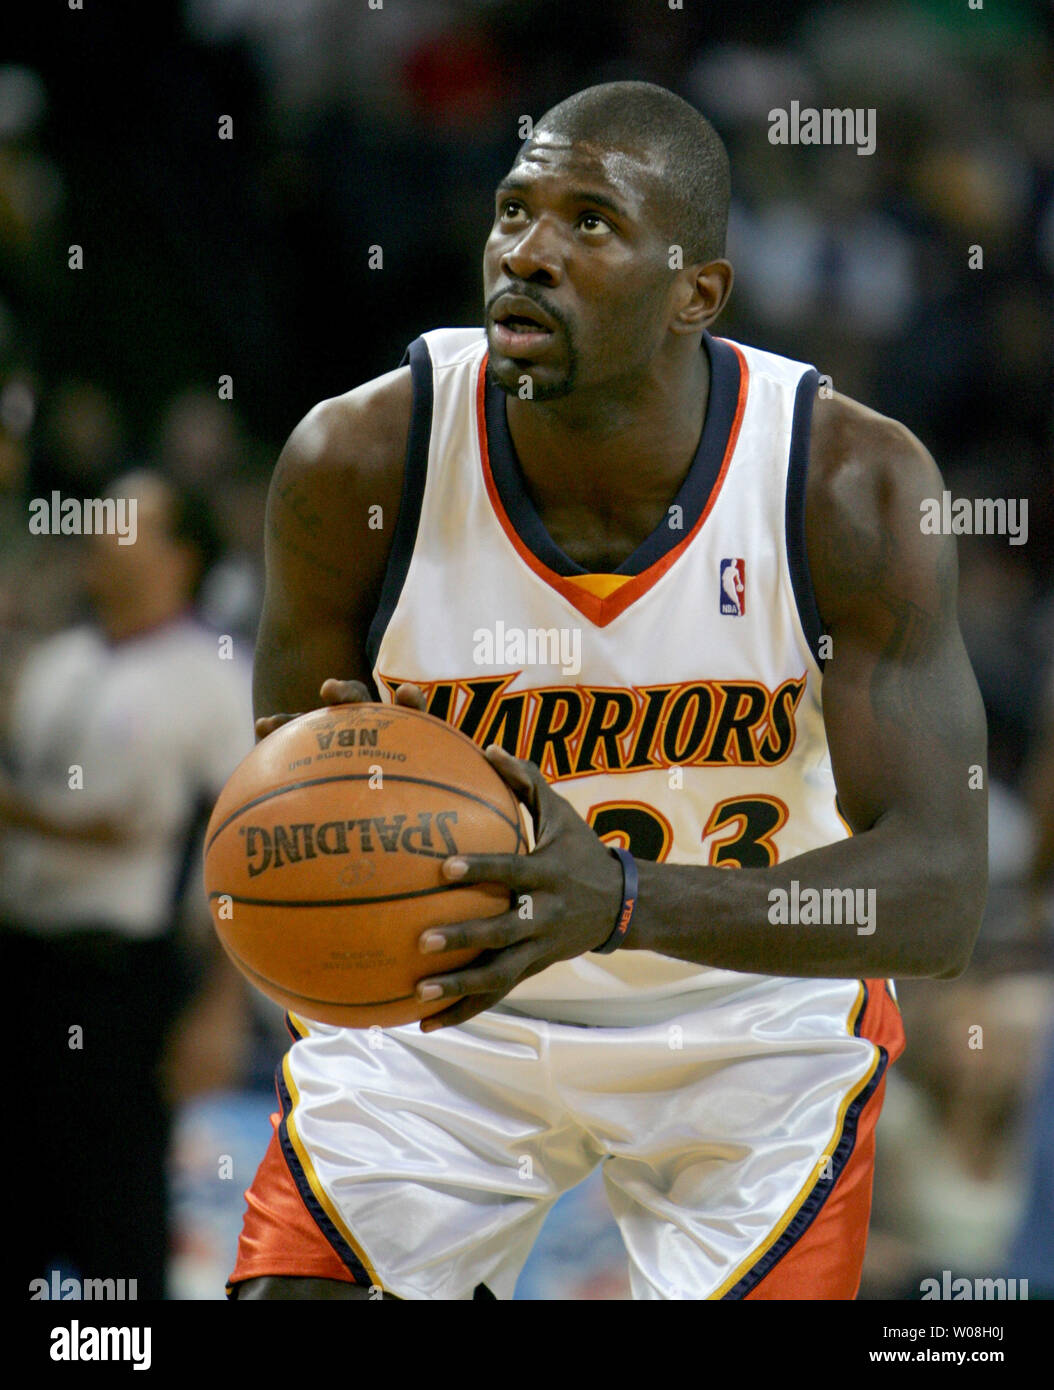 Golden State Warriors Jason Richardson 23 Takes A Free Throw Following A Flagrant Foul By The Minnesota Timberwolves At The Oracle Arena In Oakland California On April 15 07 The Warriors Defeated